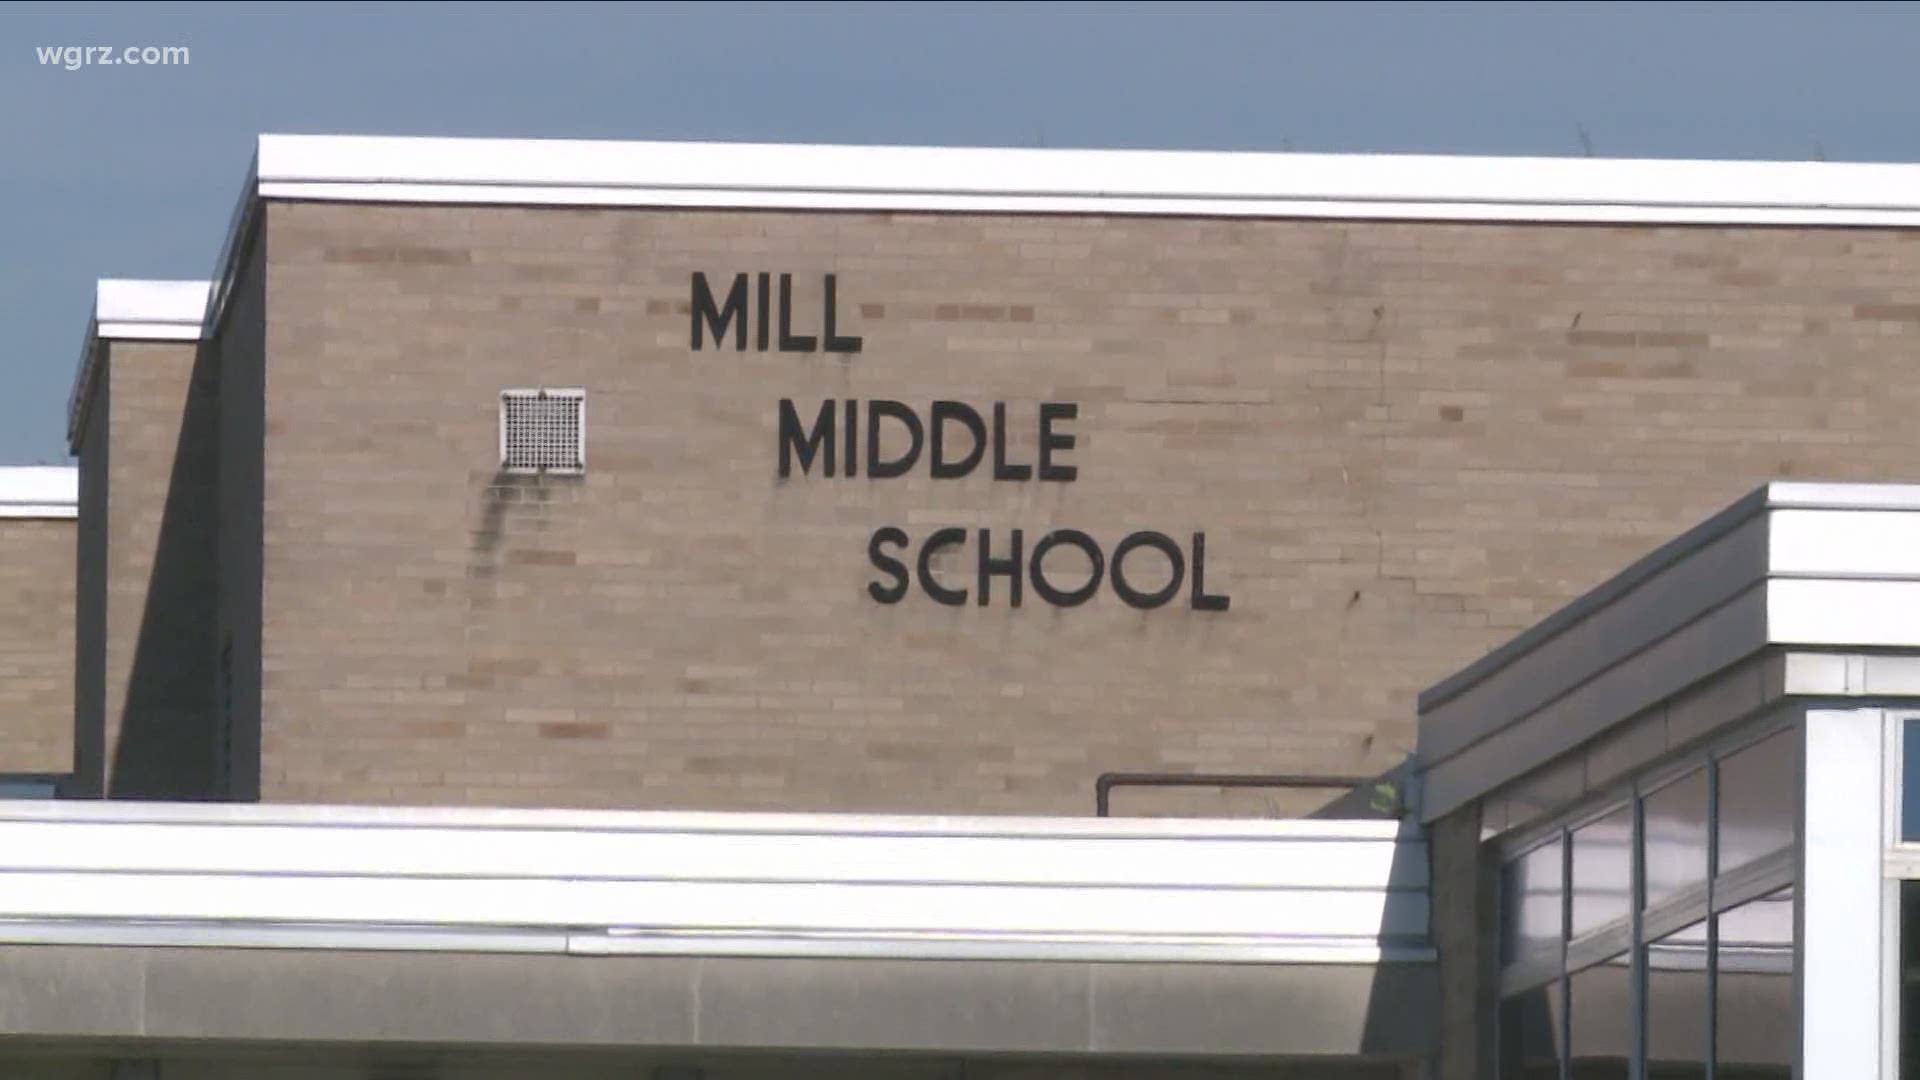 It has really been a week of turmoil for the Williamsville School District and now its superintendent is on administrative leave the day before the classes begin.